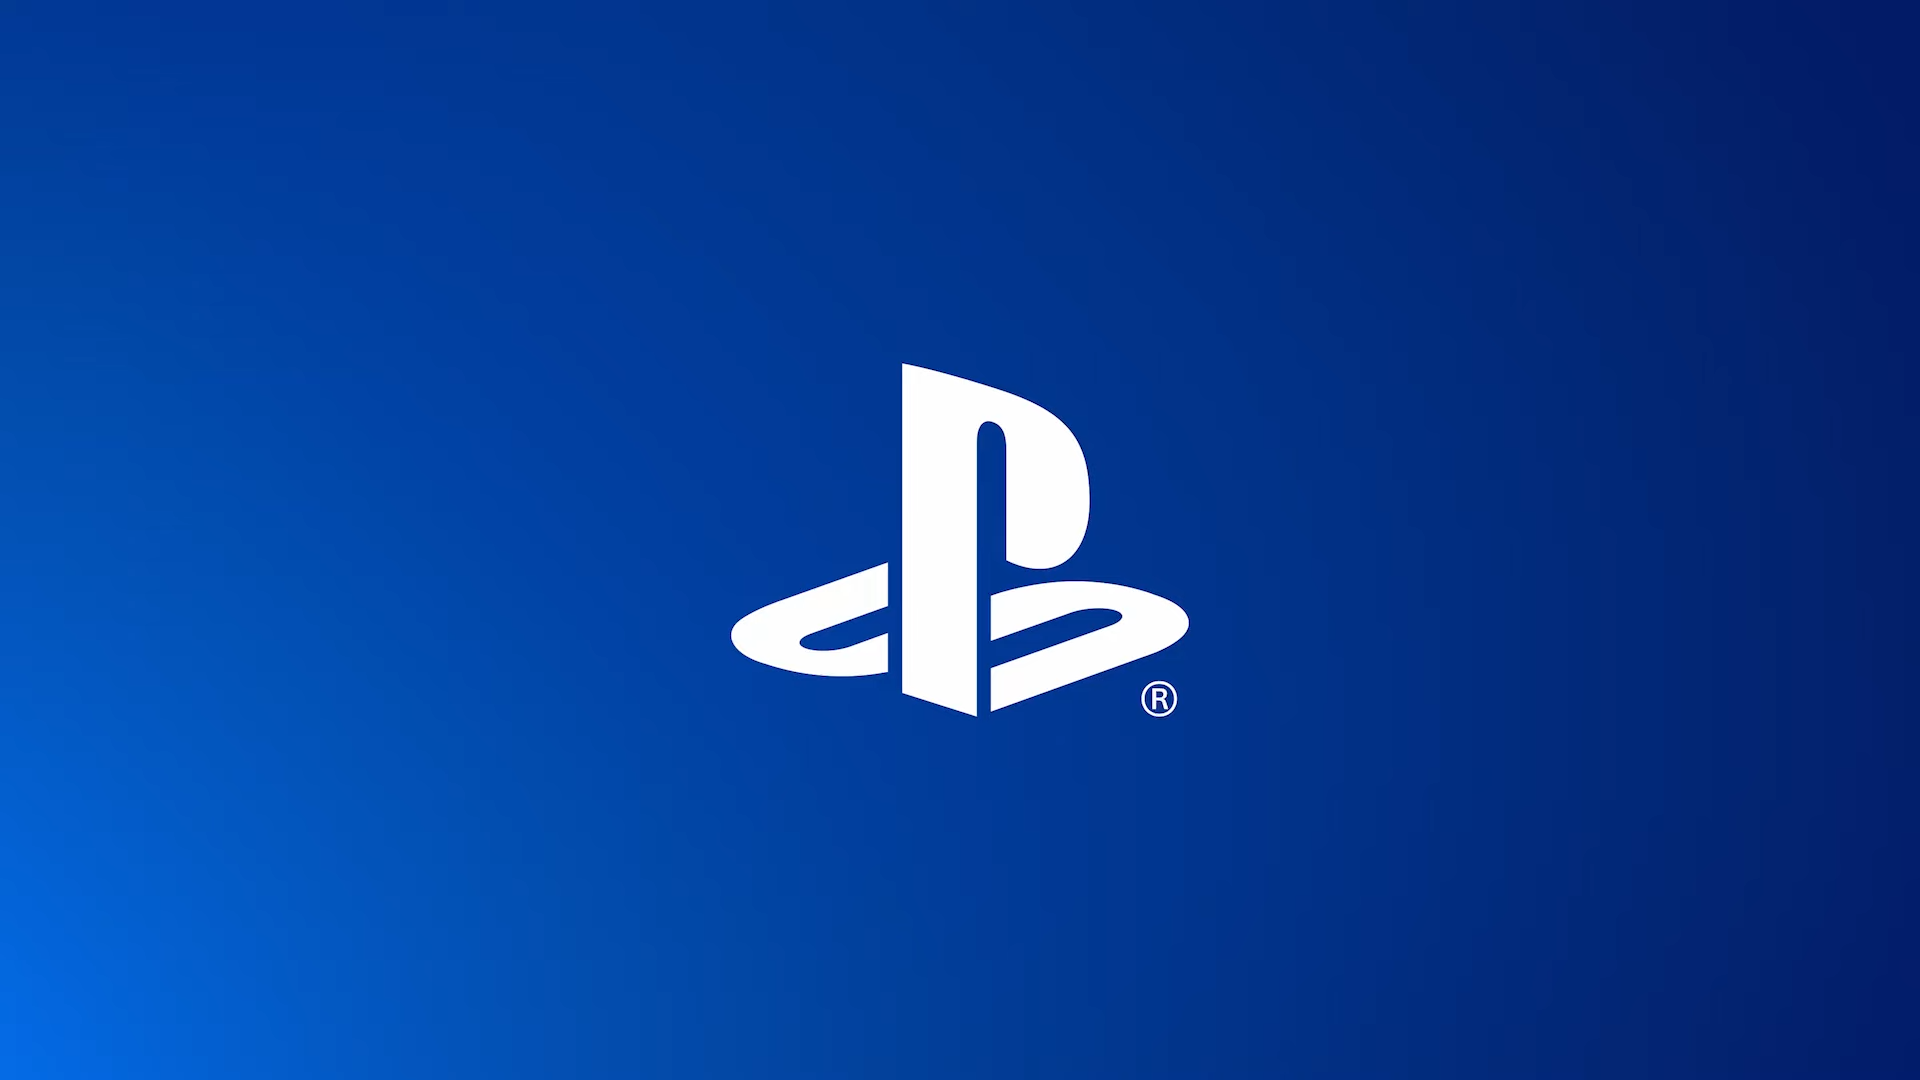 PlayStation lays off 900 employees across multiple regions